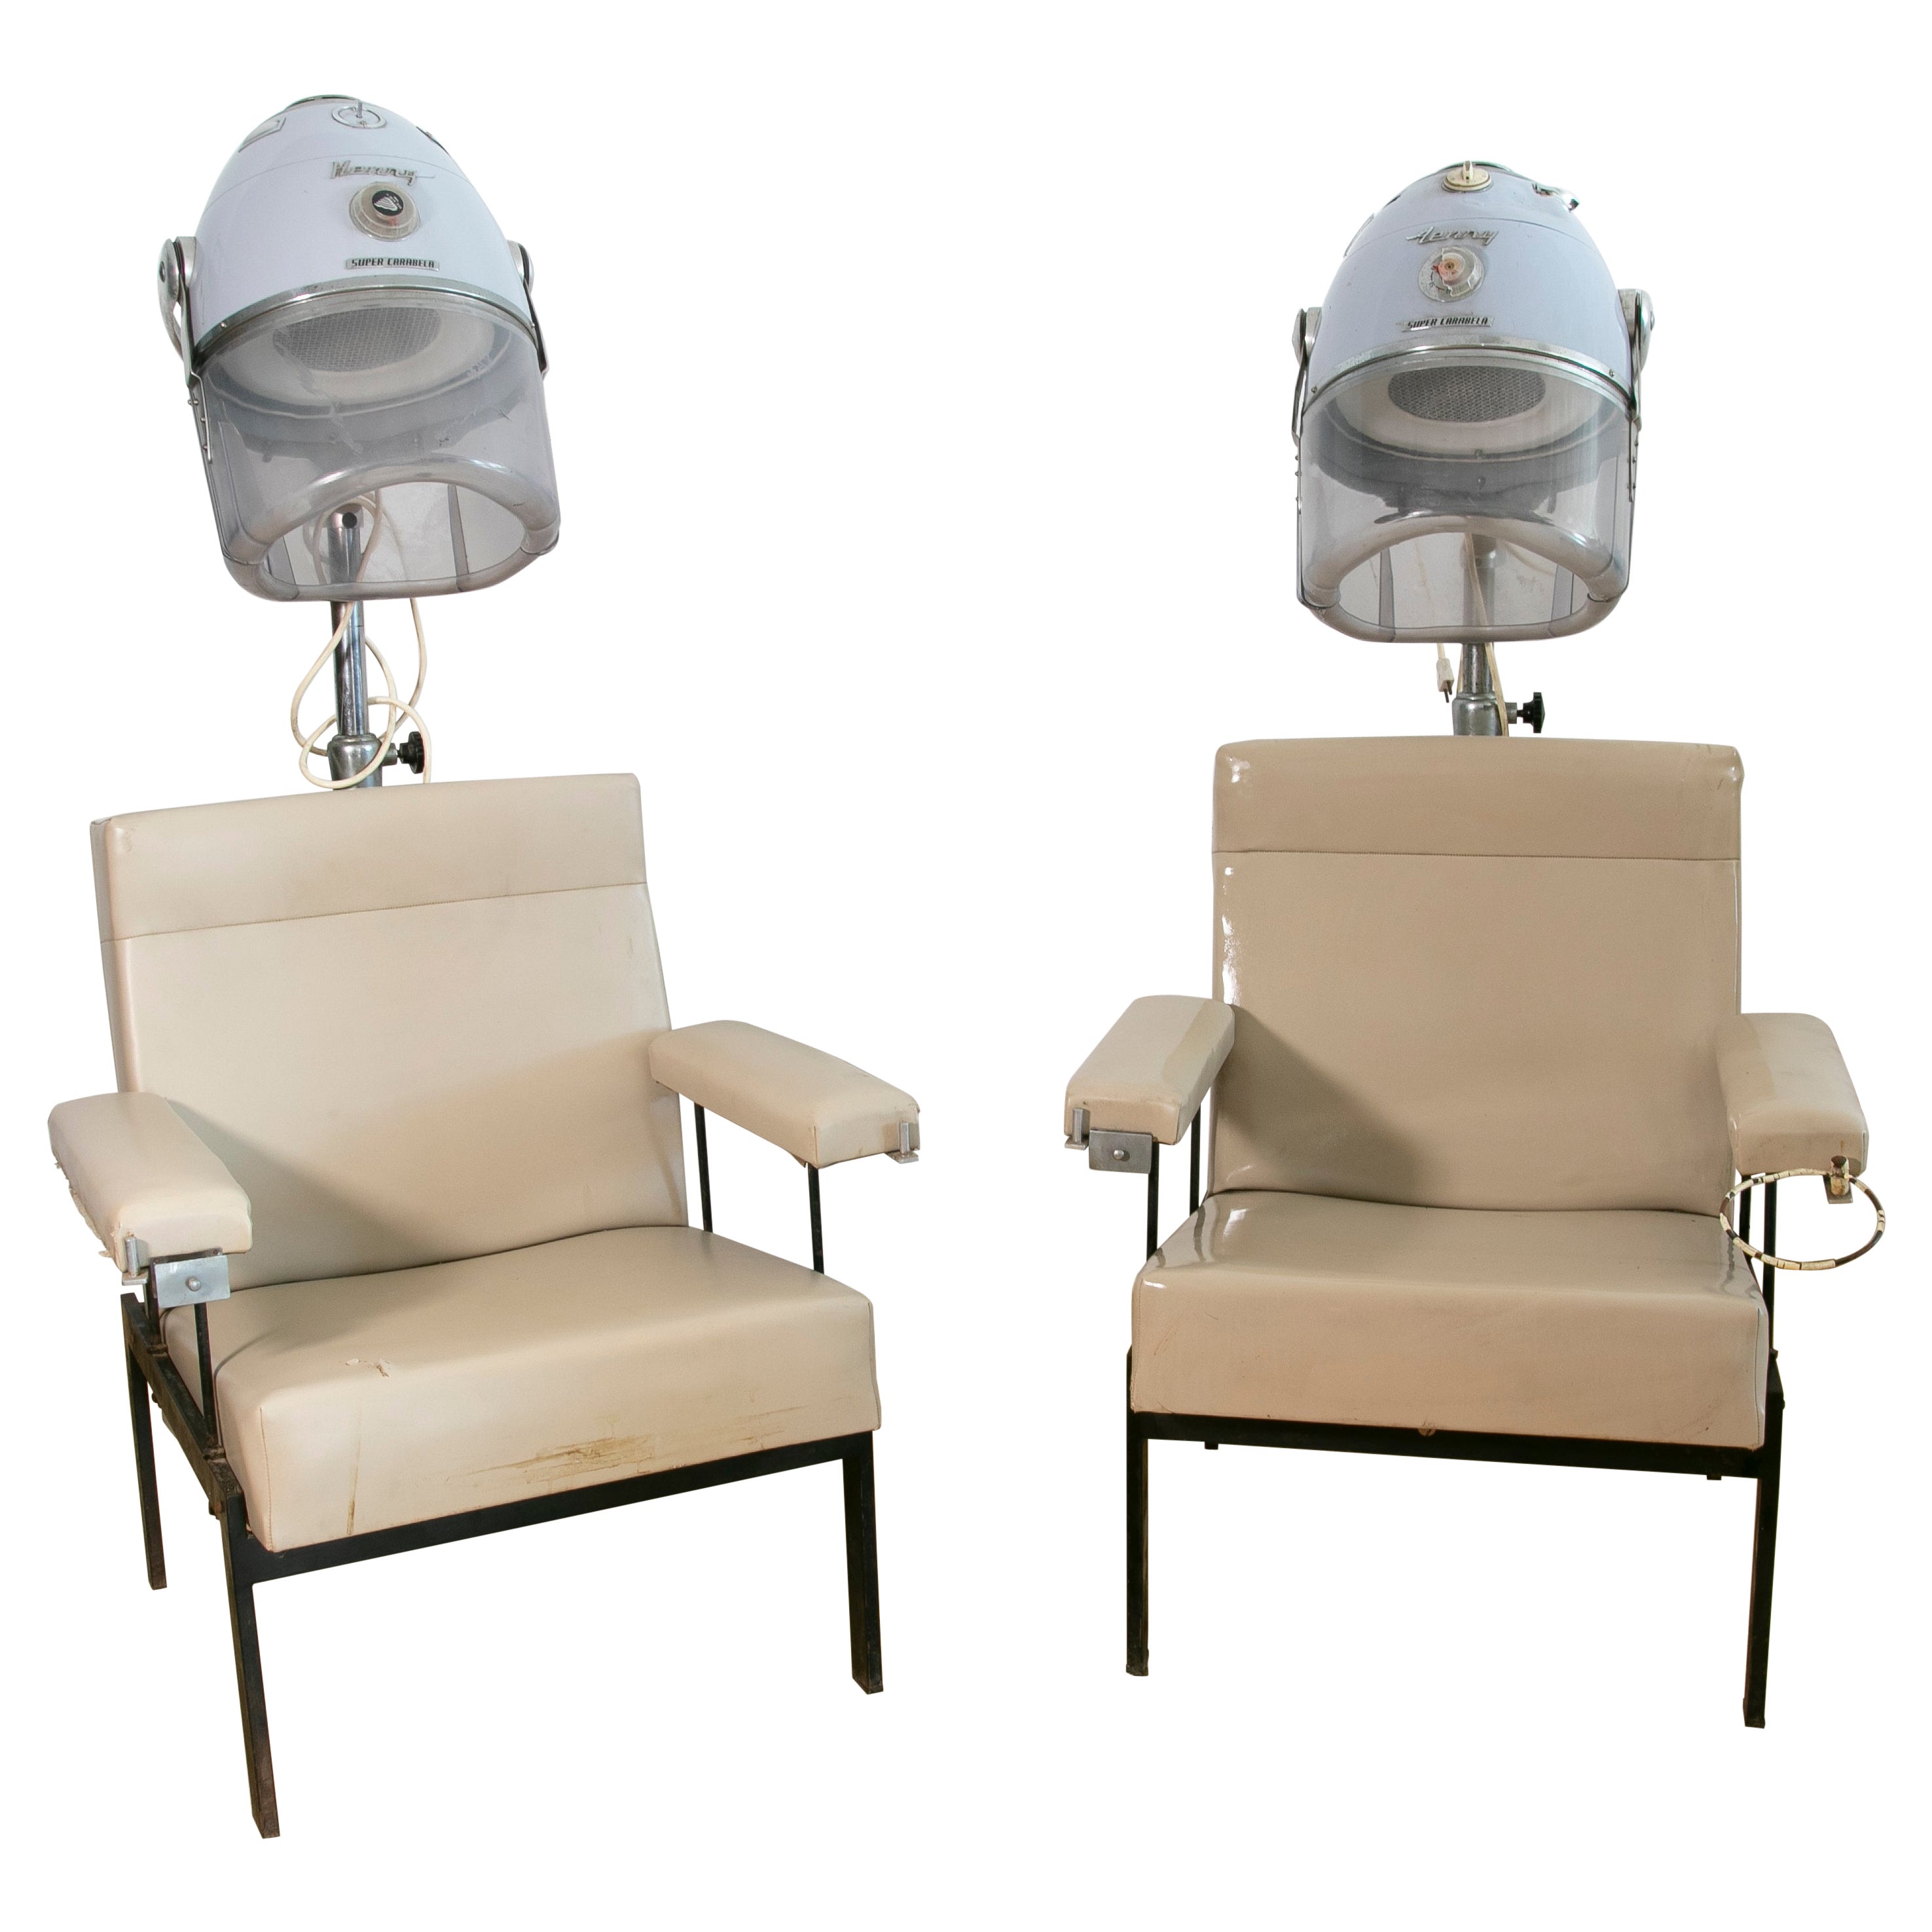 Pair of Ladies Hairdressing Chairs with Original Machine, Henry C. Brand For Sale